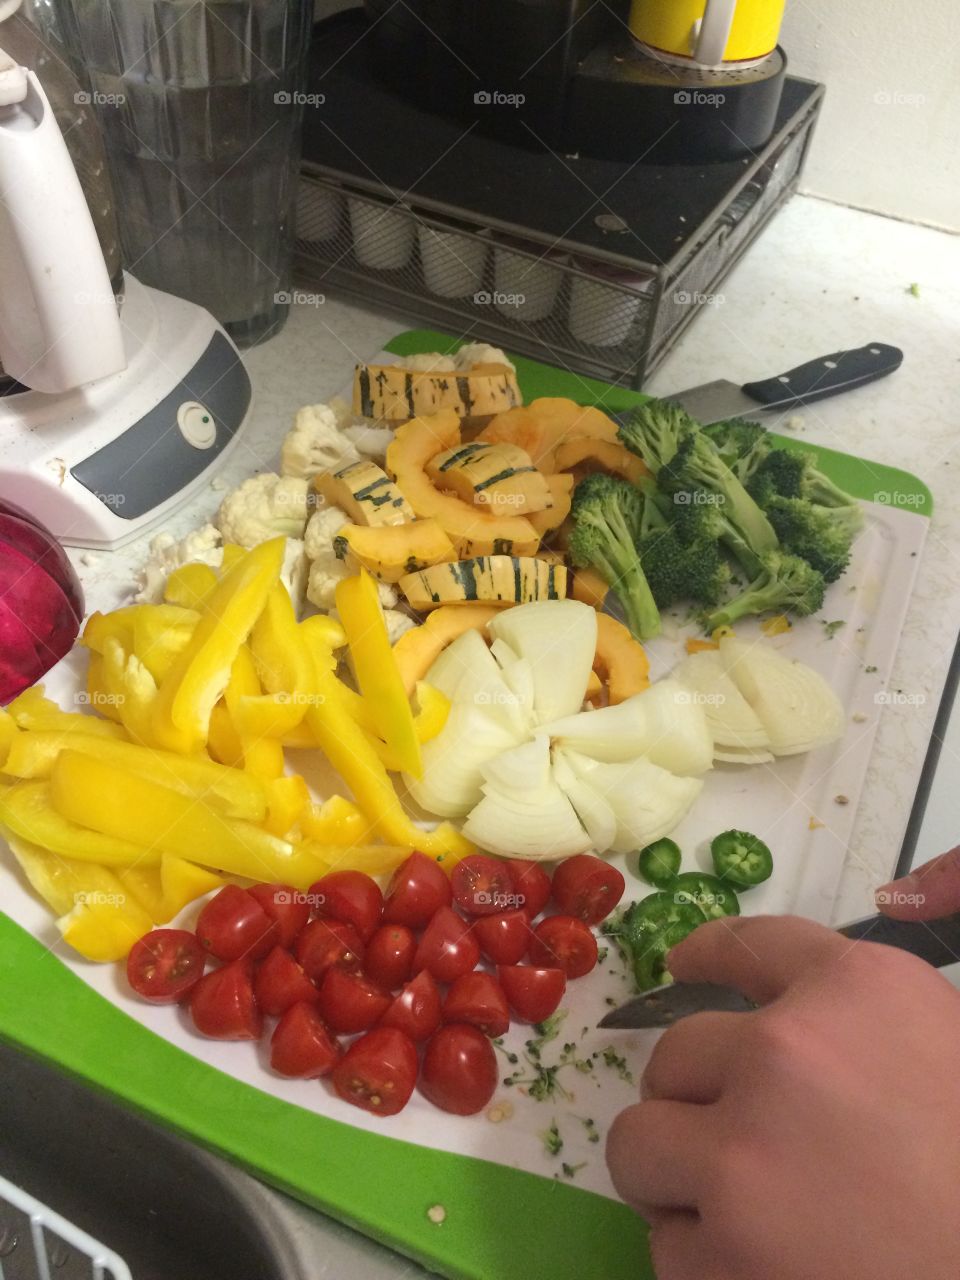 Vegetable Chopping. Meal preparation by chopping various vegetables to cook